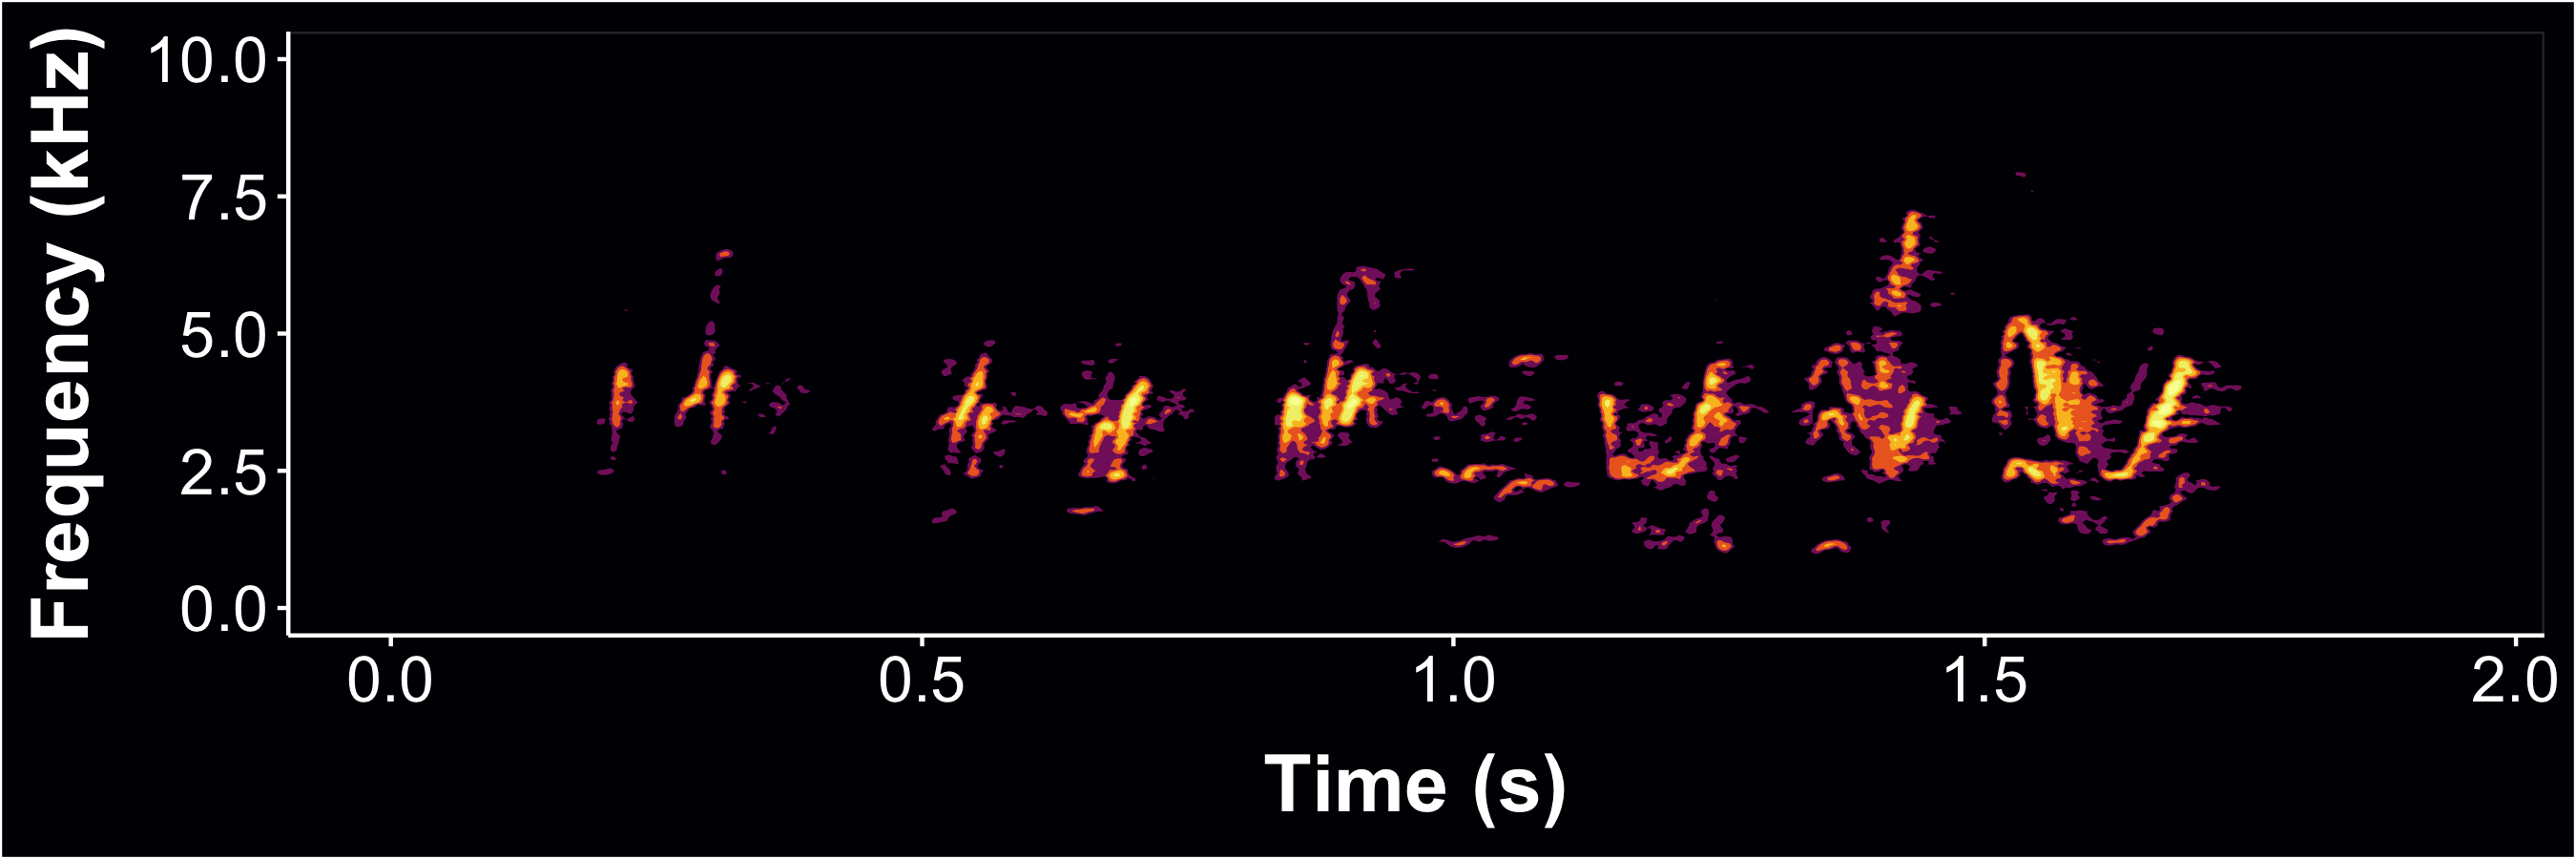 Static spectrogram with axis labels for female barn swallow song